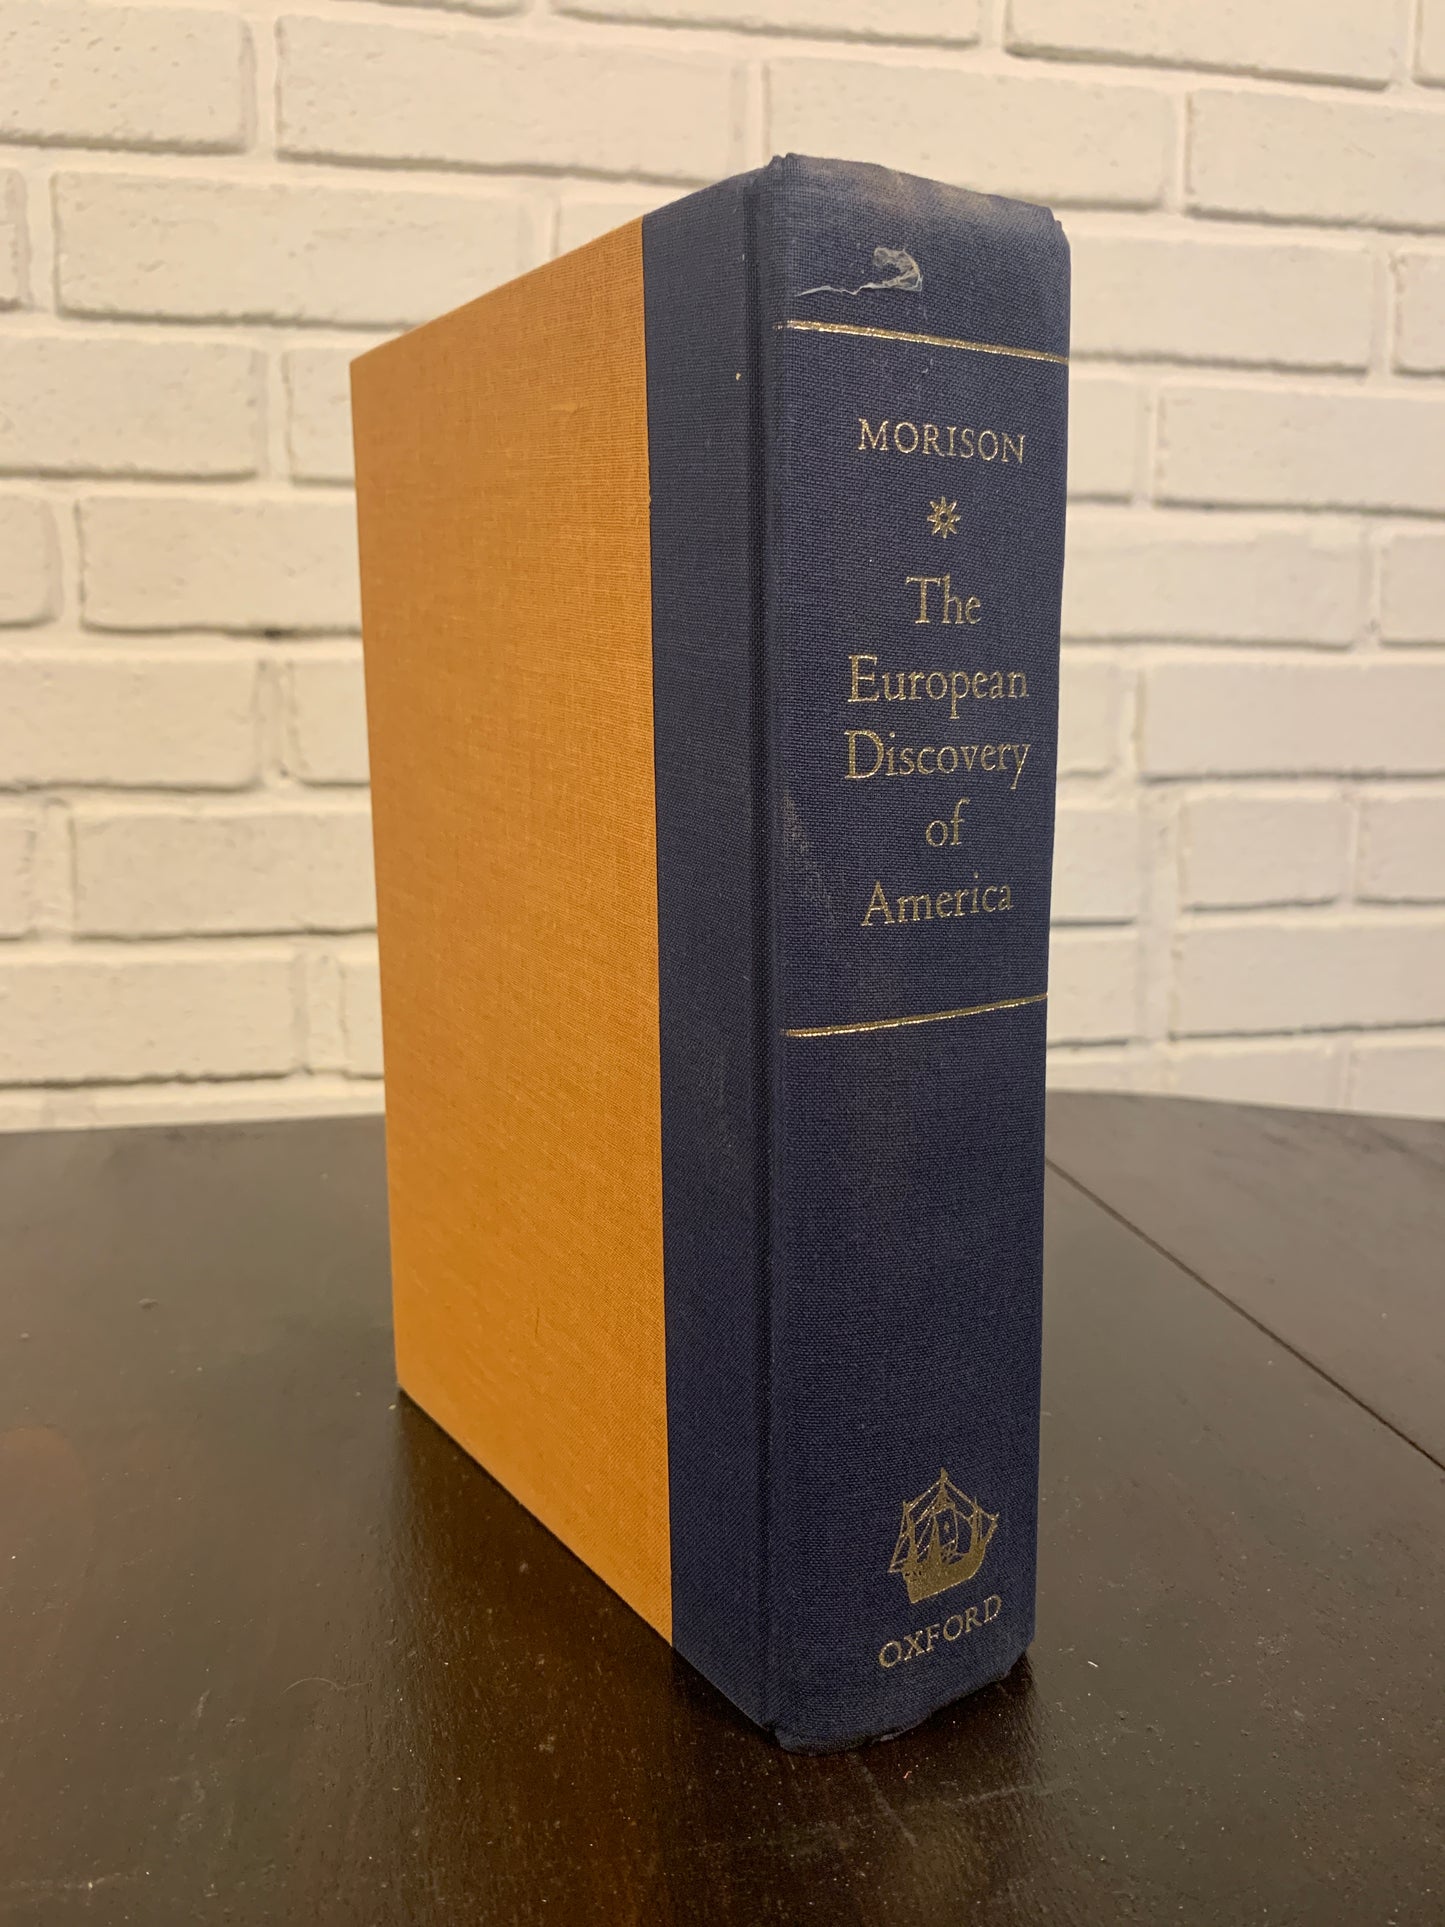 The European Discovery Of America by Samuel Eliot Morison 1971